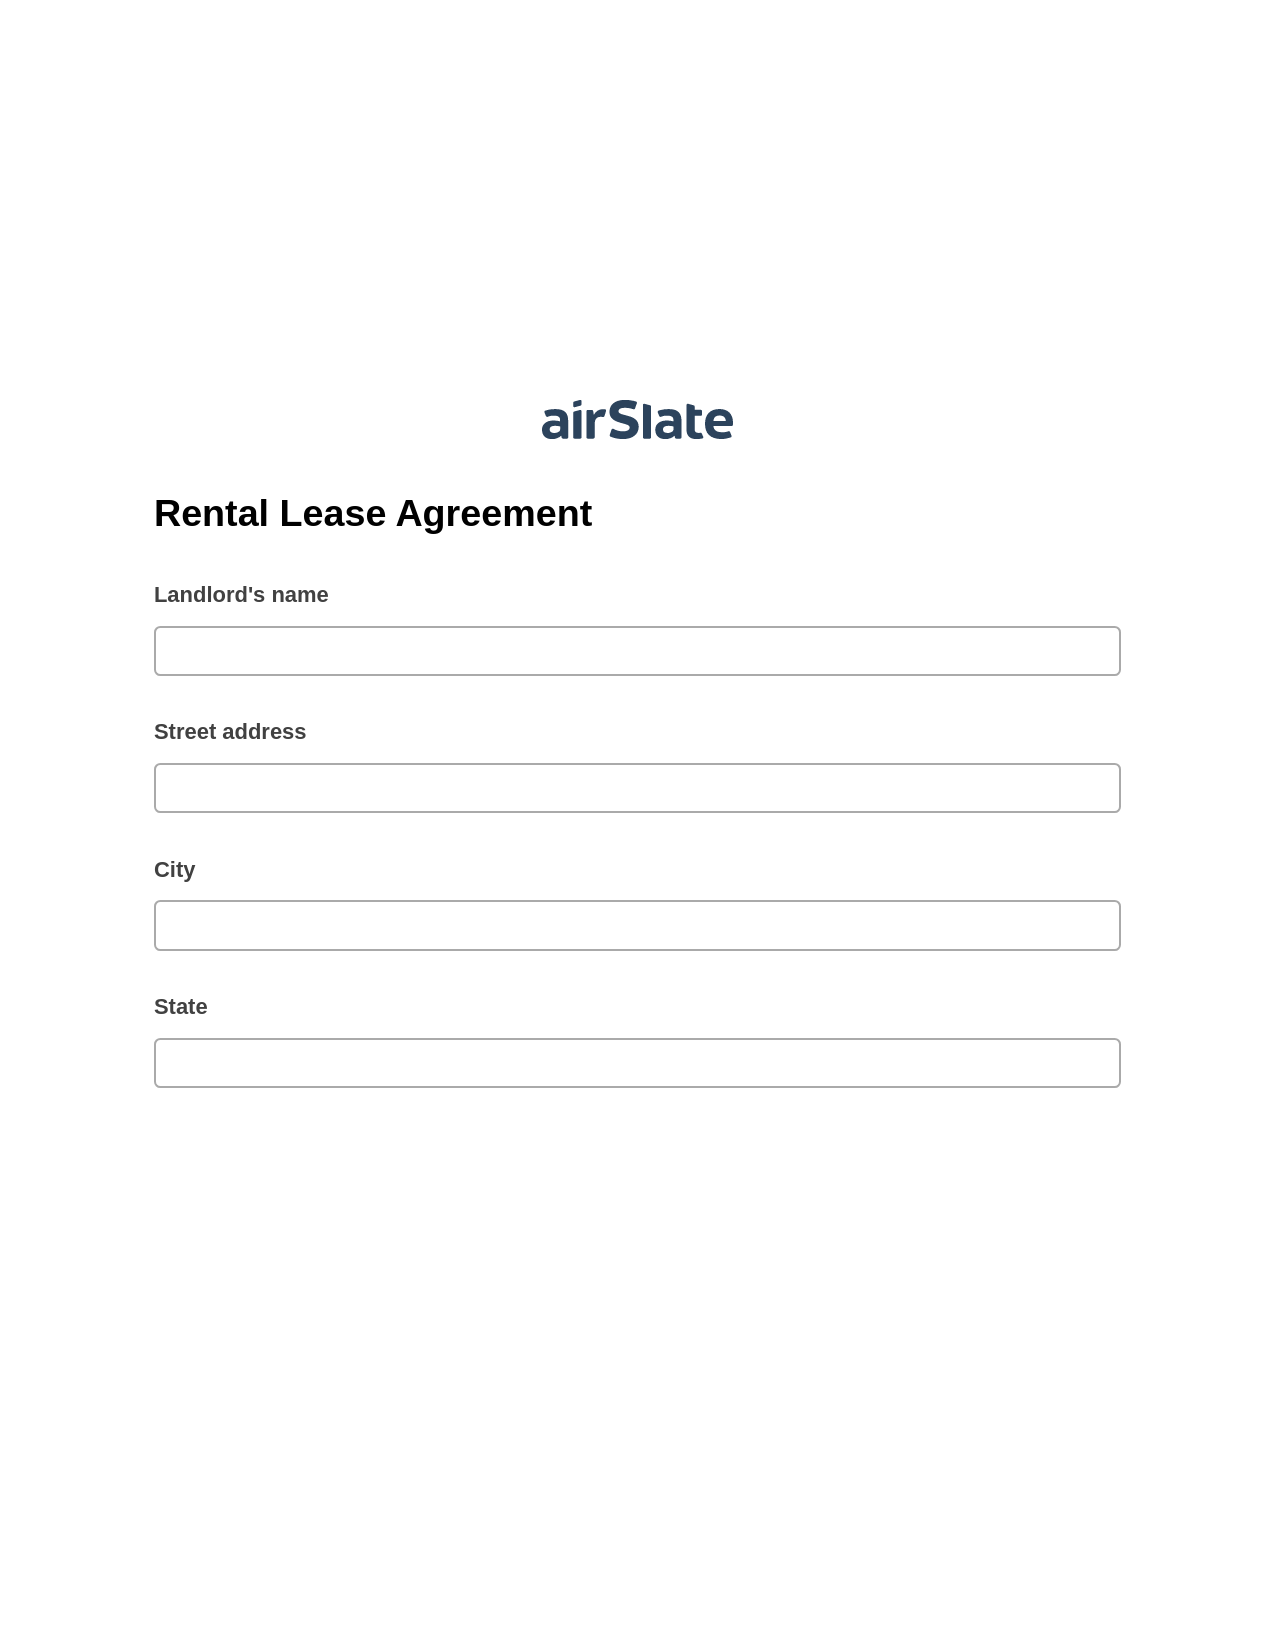 Rental Lease Agreement Pre-fill Document Bot, Jira Bot, Email Notification Postfinish Bot